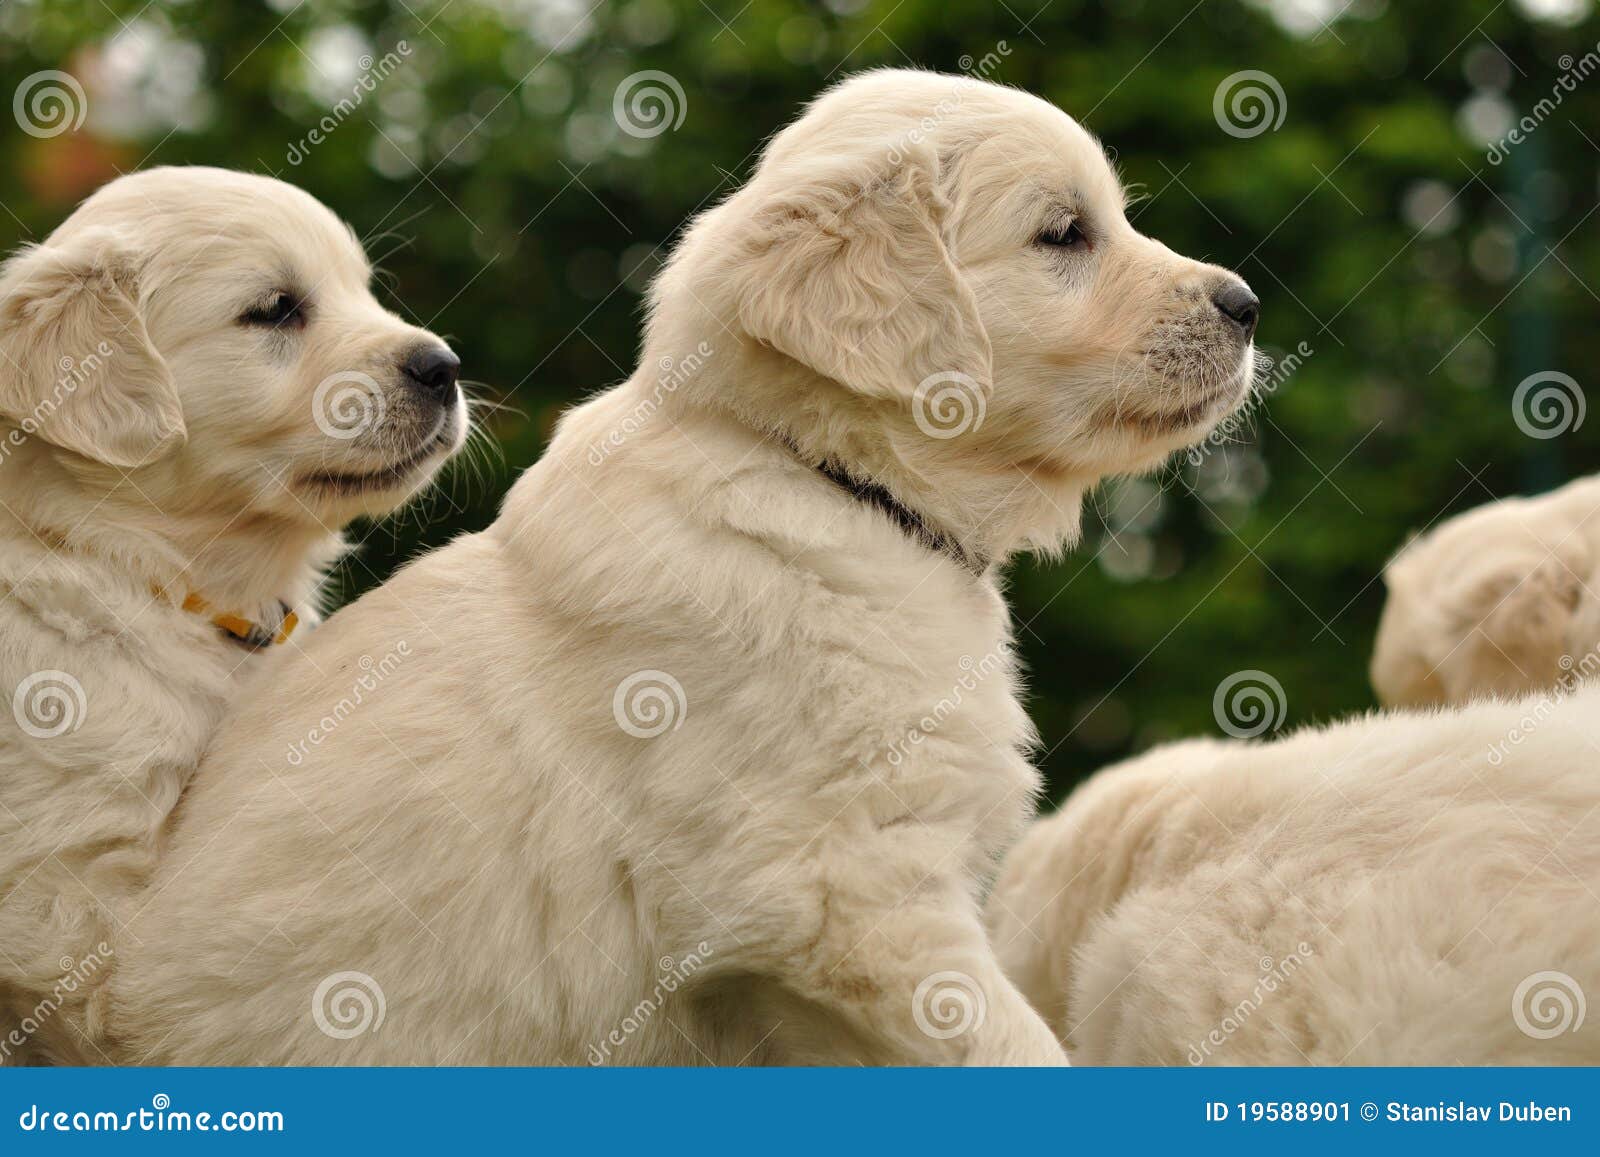 Golden Retriever Puppies From Side Stock Image Image Of Right Golden 19588901